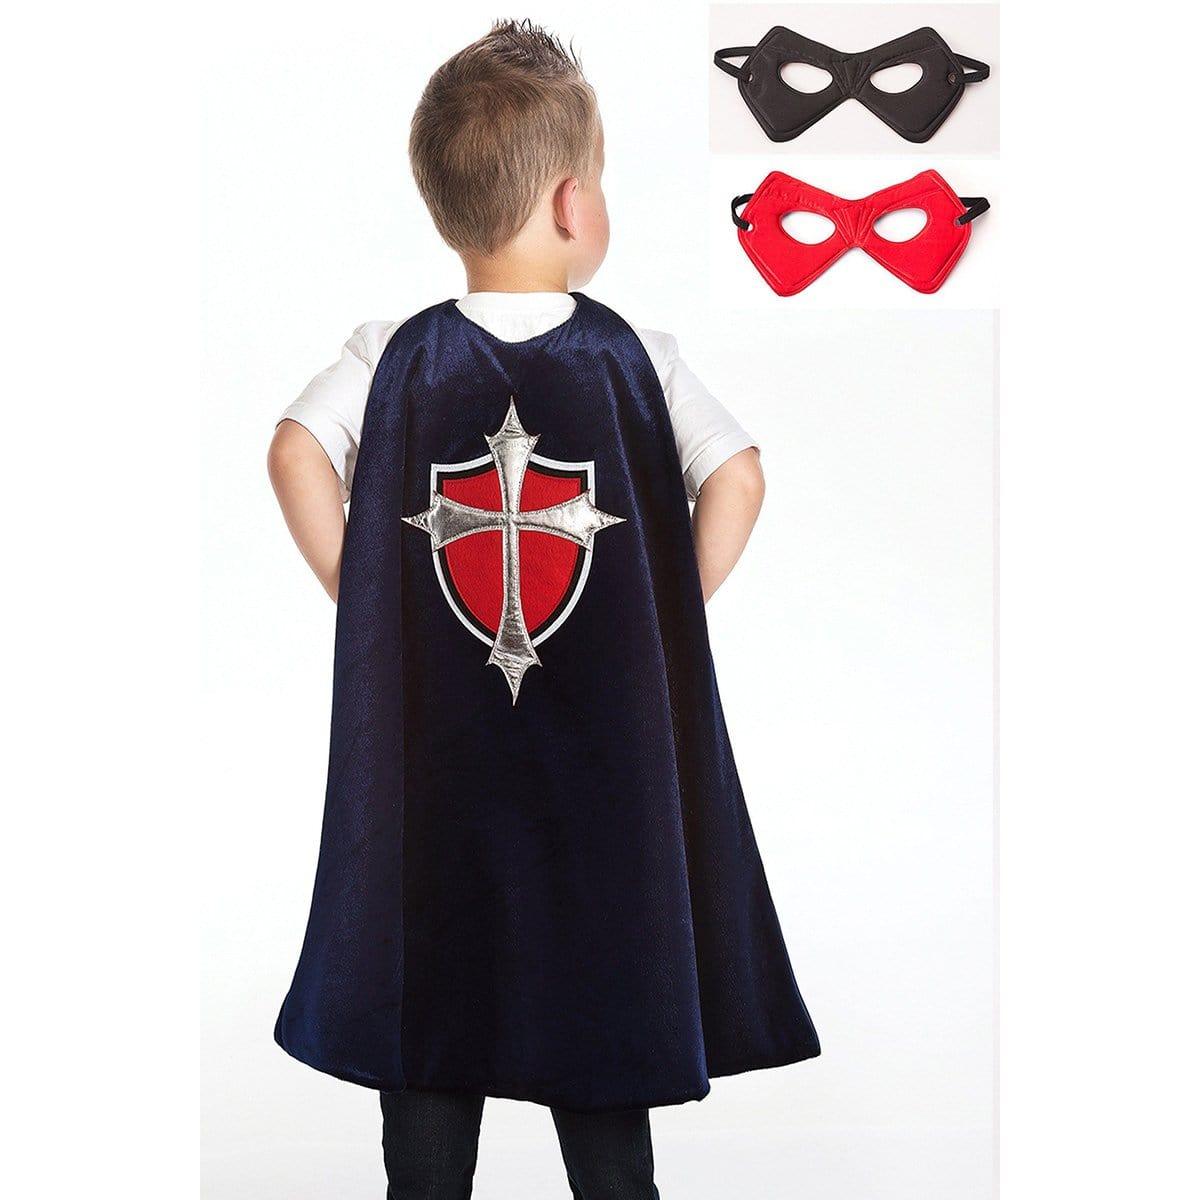 Buy Costume Accessories Prince cape & mask set for boys sold at Party Expert